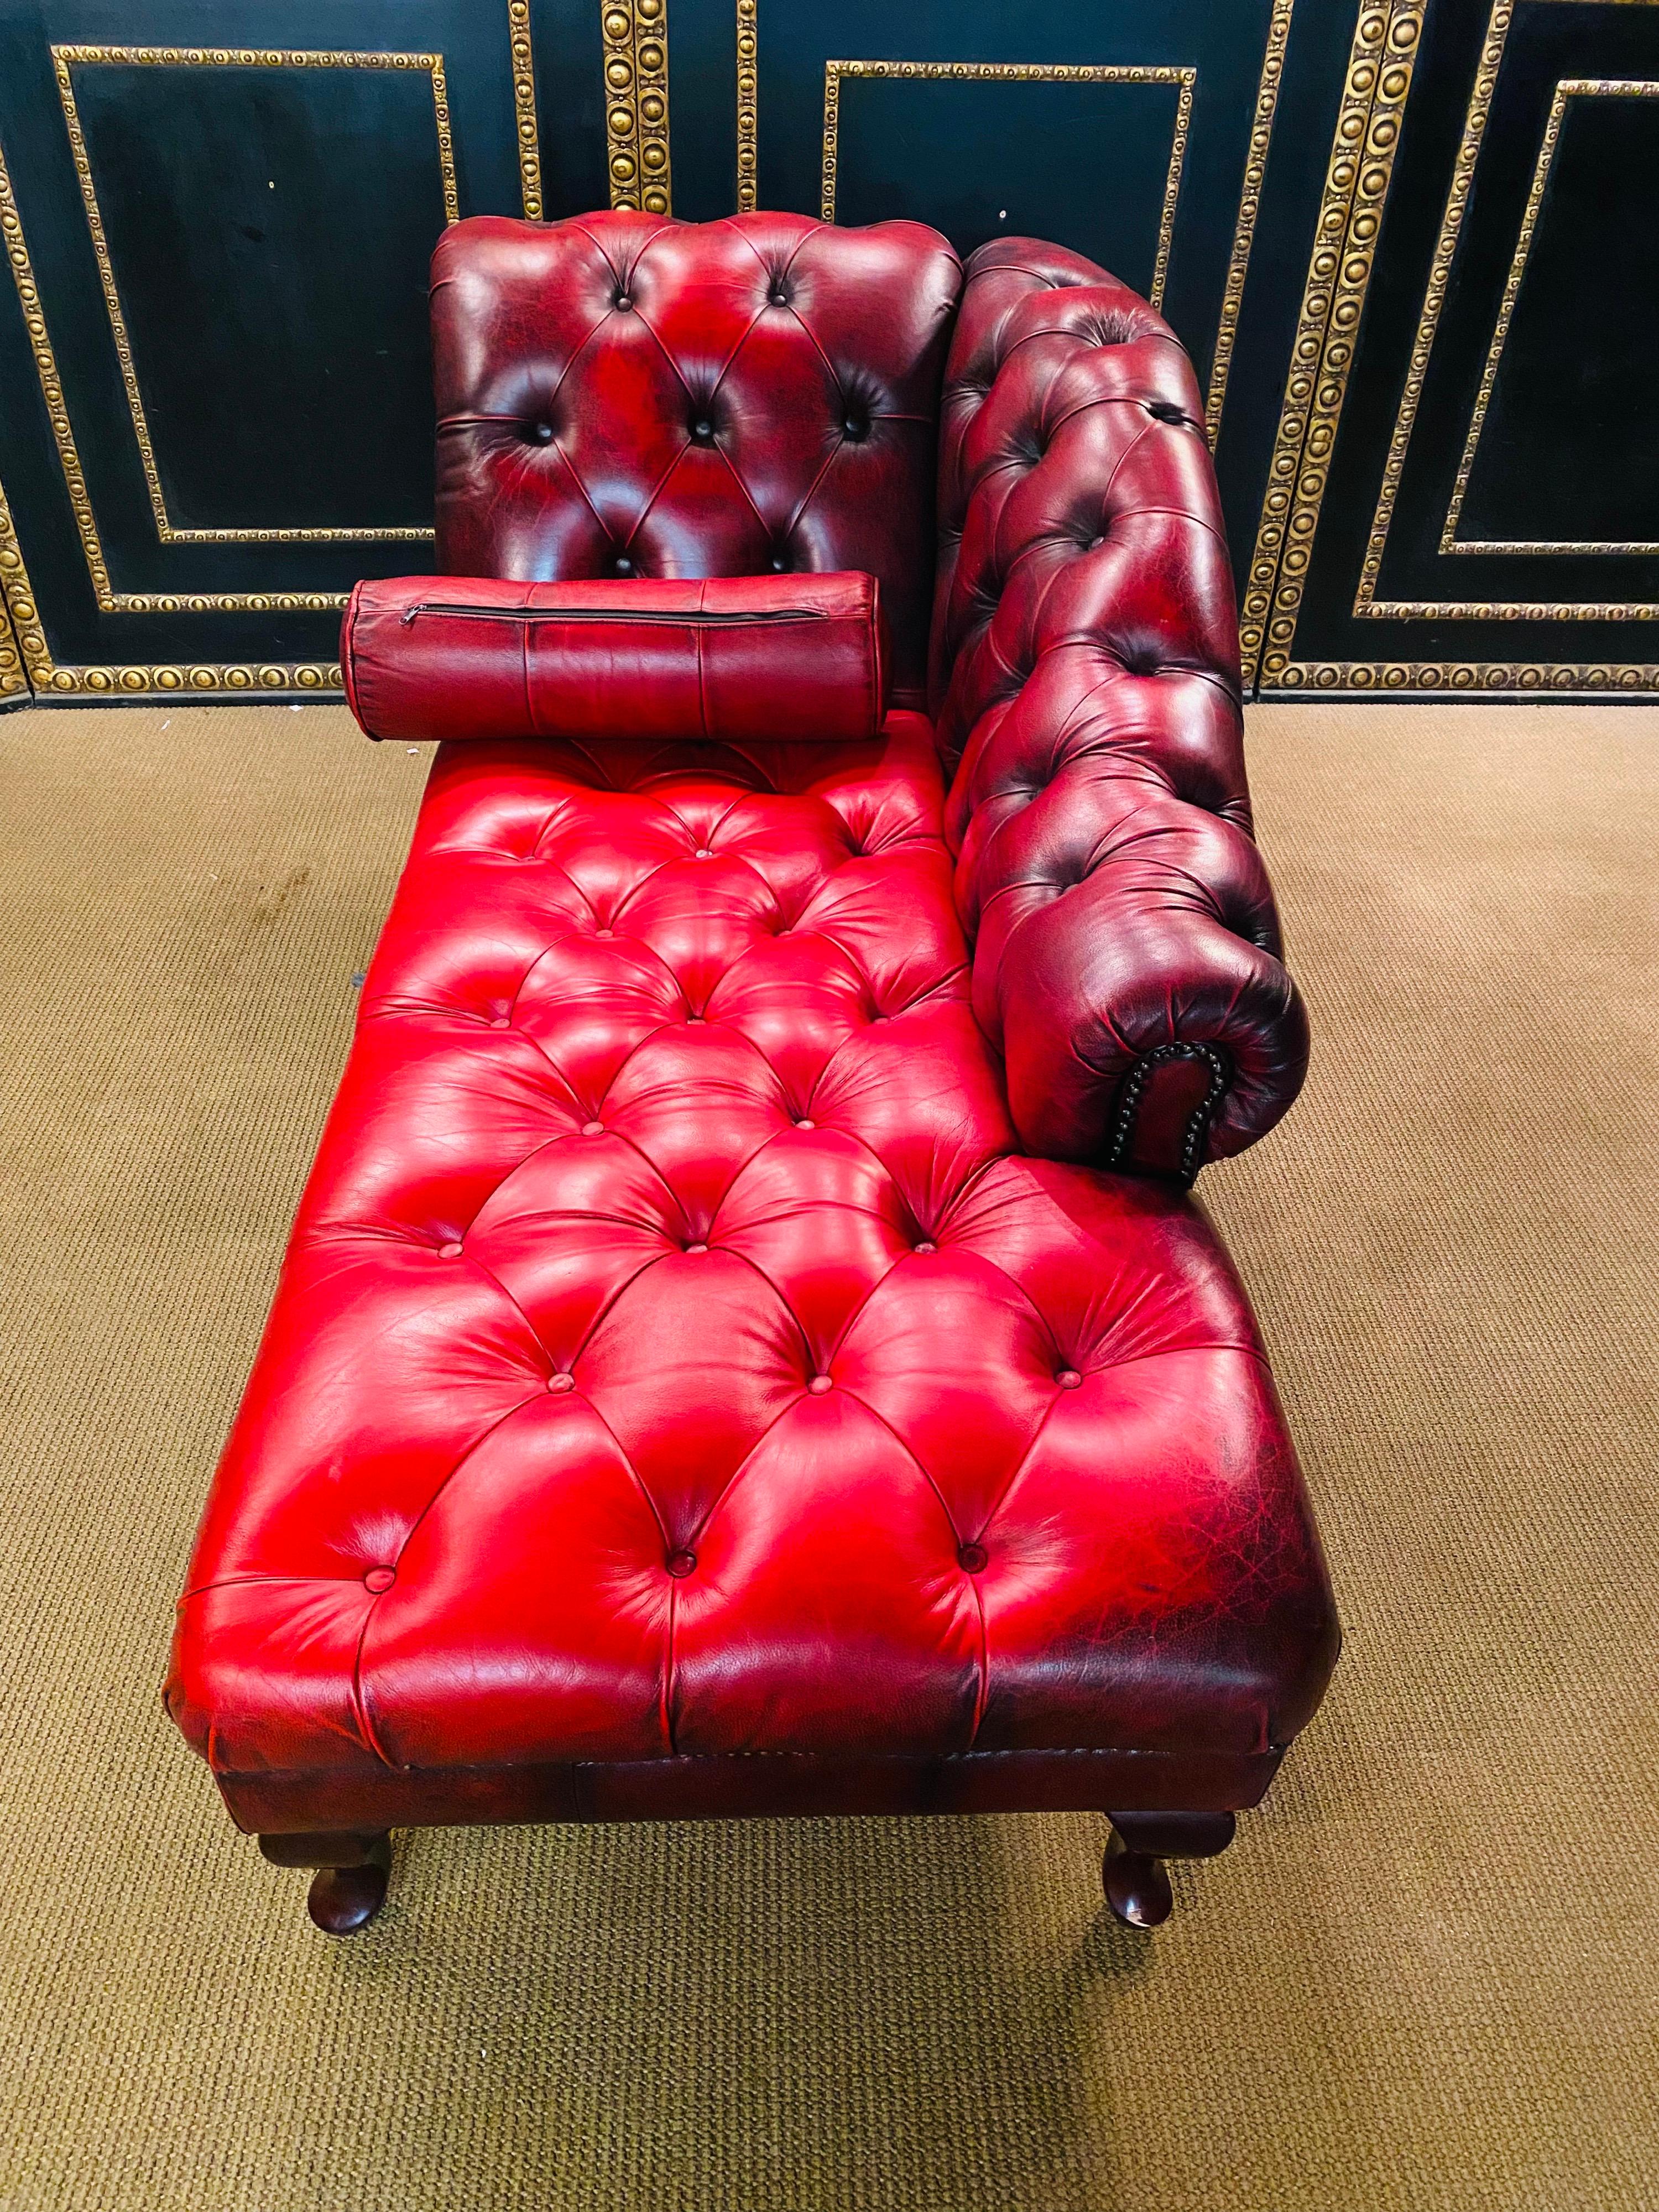 Lovely original vintage Chesterfield Red Leather Chaise Lounge Daybed Sofa For Sale 5